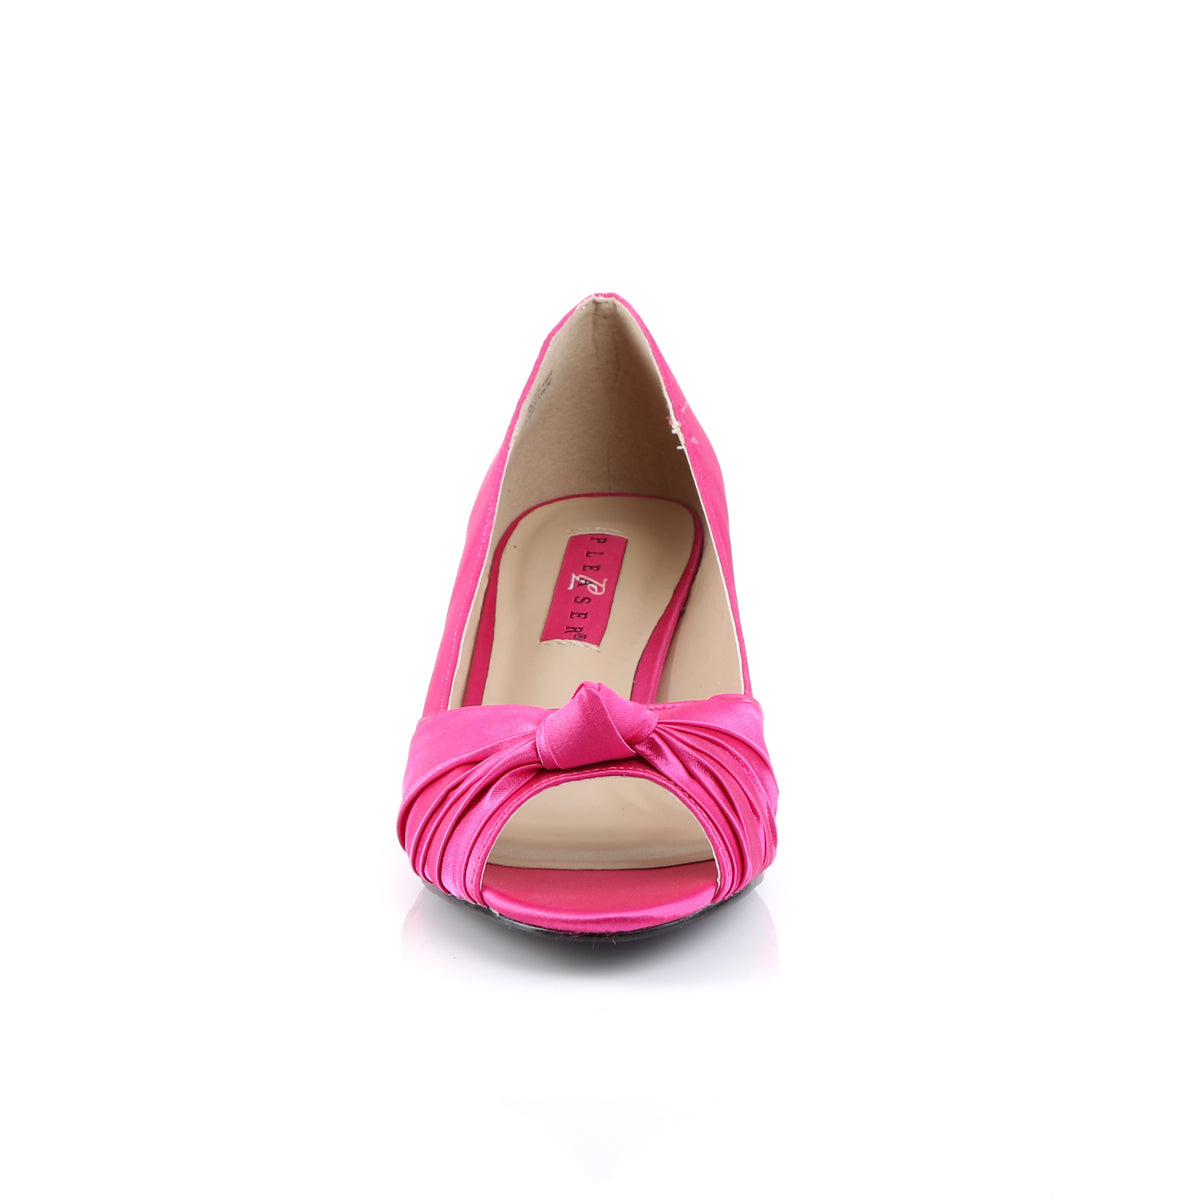 Pleaser Pink Label Womens Pumps FAB-422 H. Pink Satin